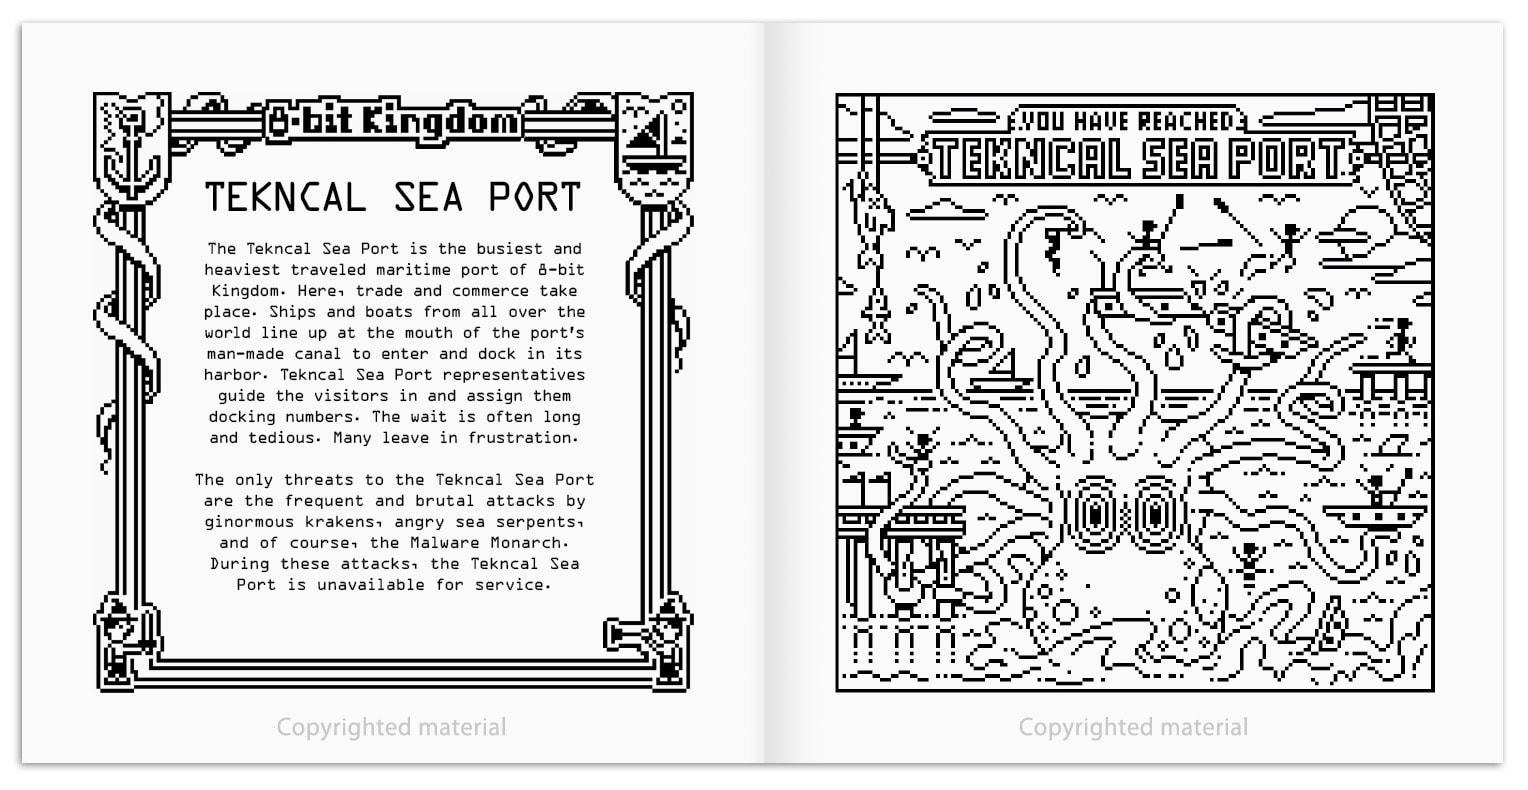 Coloring book page sample from 8-bit Kingdom Medieval tales of computer technology coloring book by Joe Lacey. Giant octopus attacking the sea port, Tekncal Sea Port.